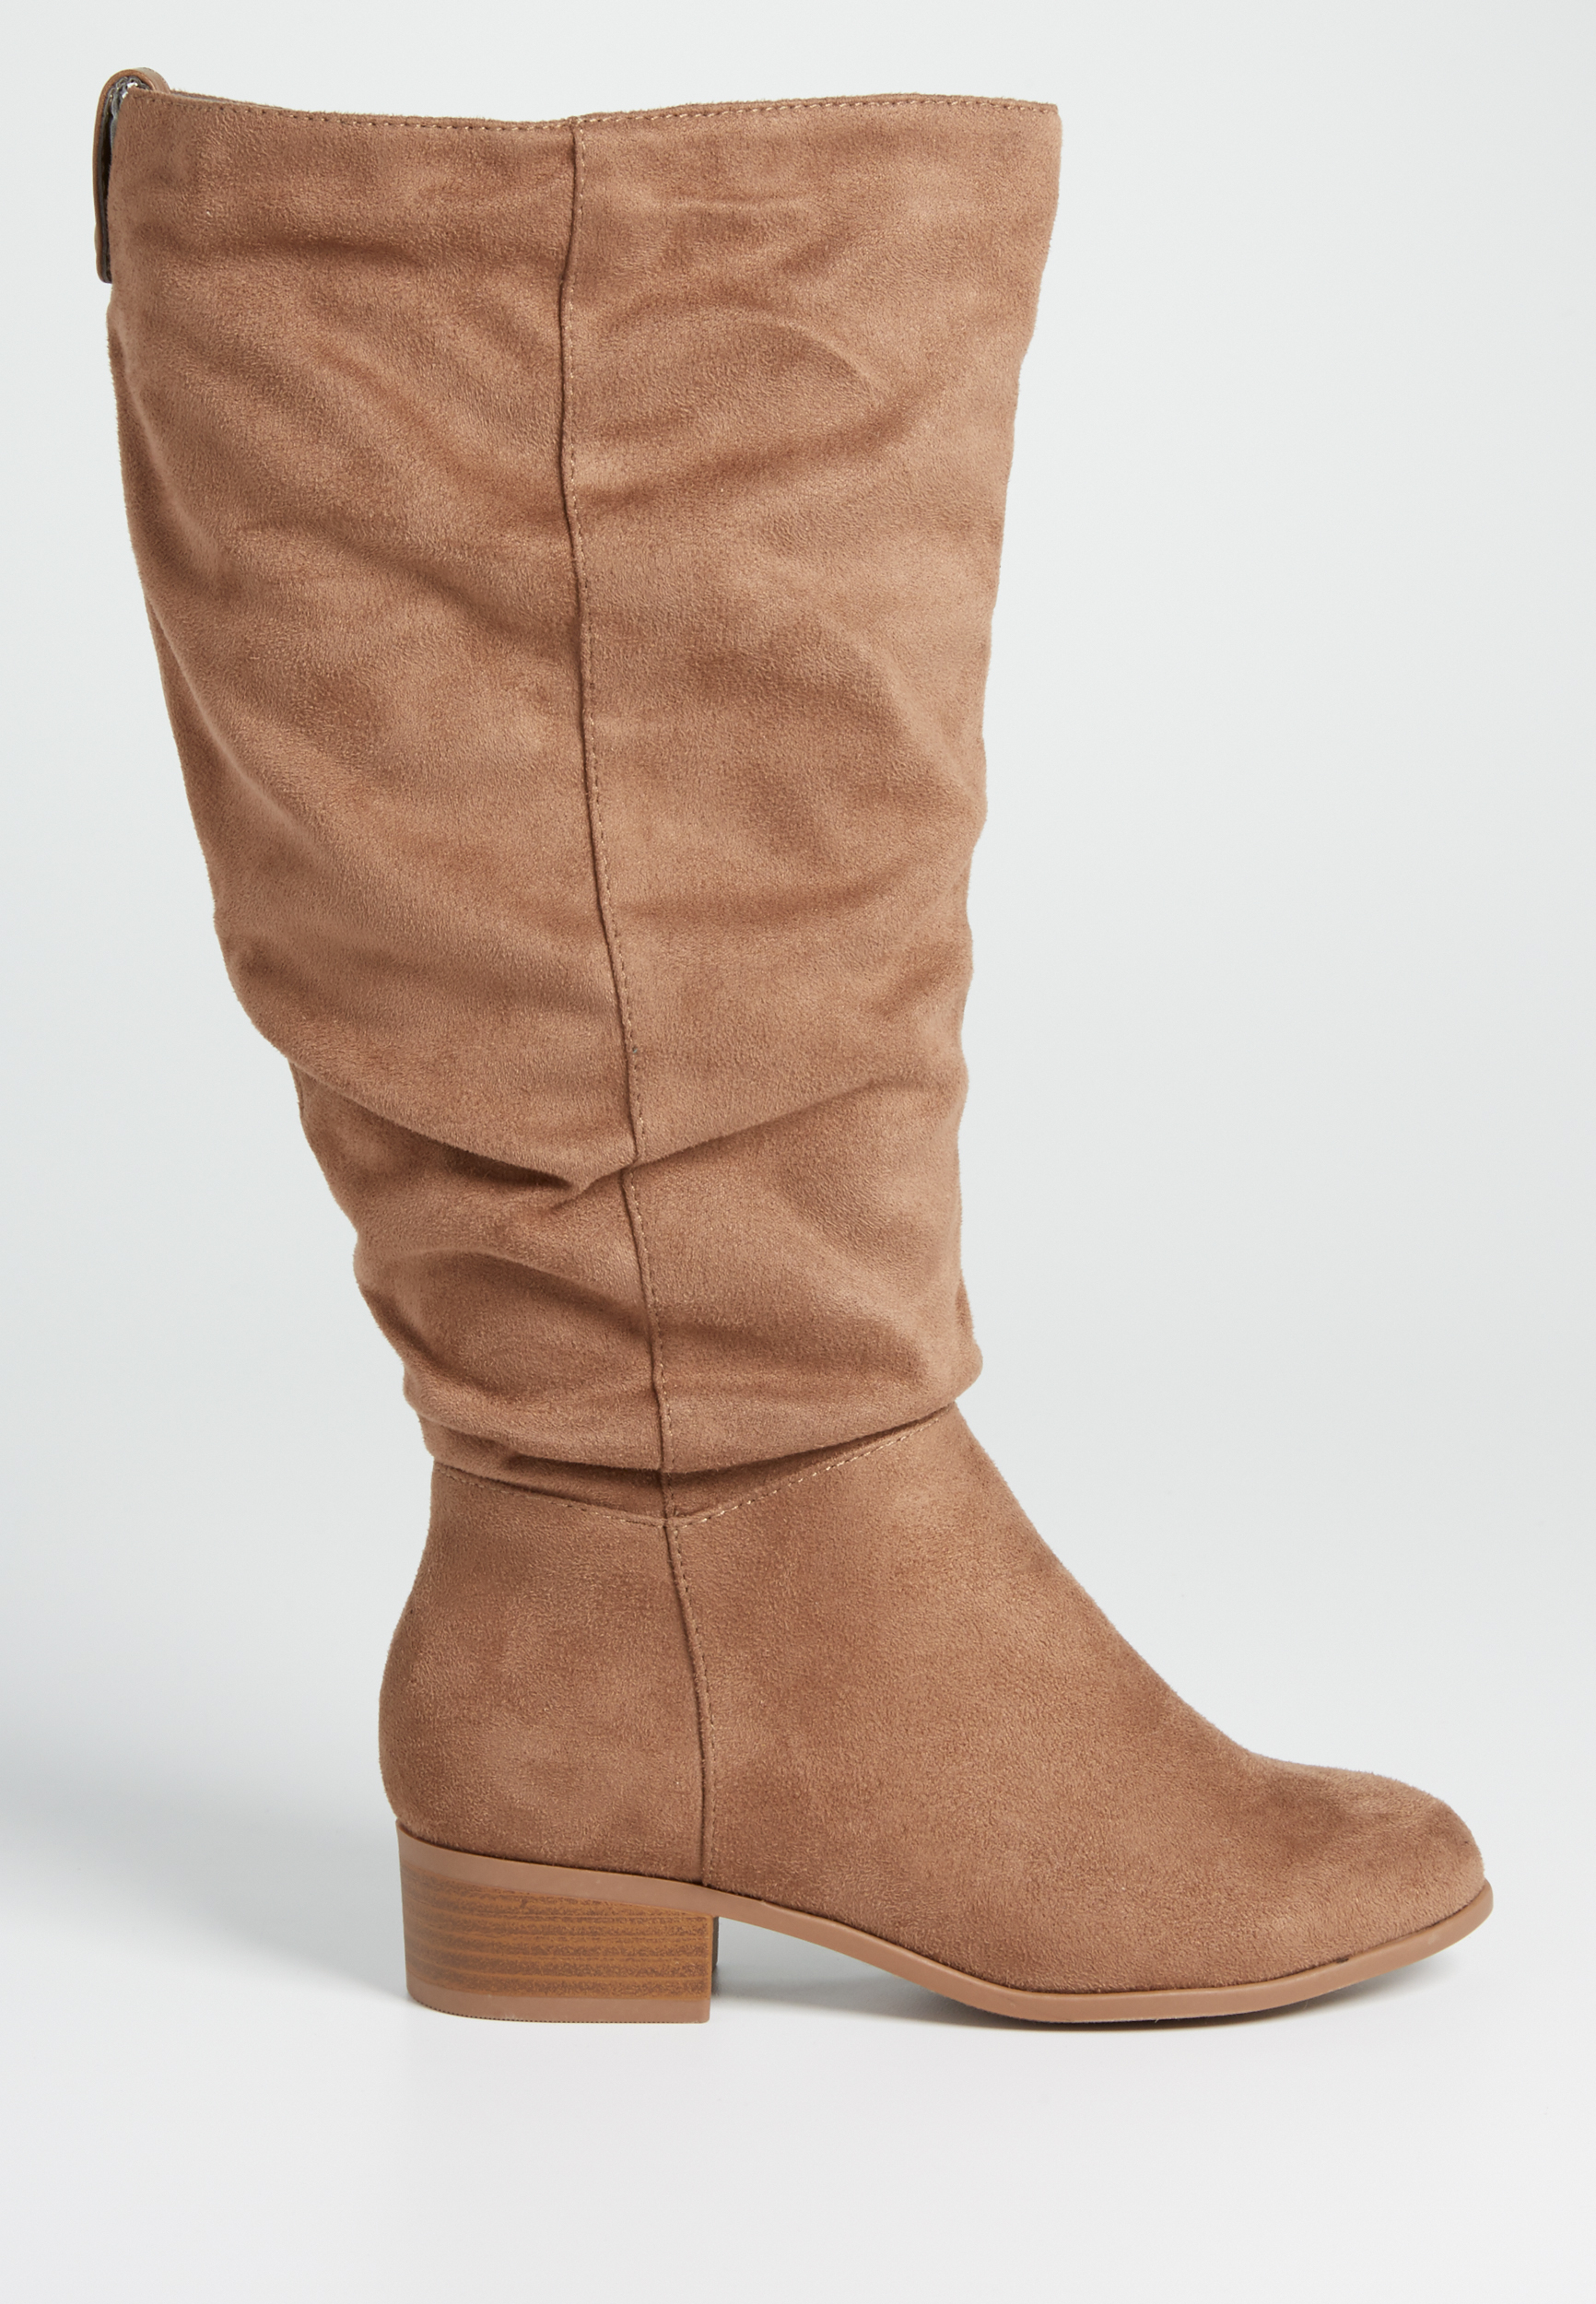 Sheryl wide calf faux suede boot in dark tan | maurices